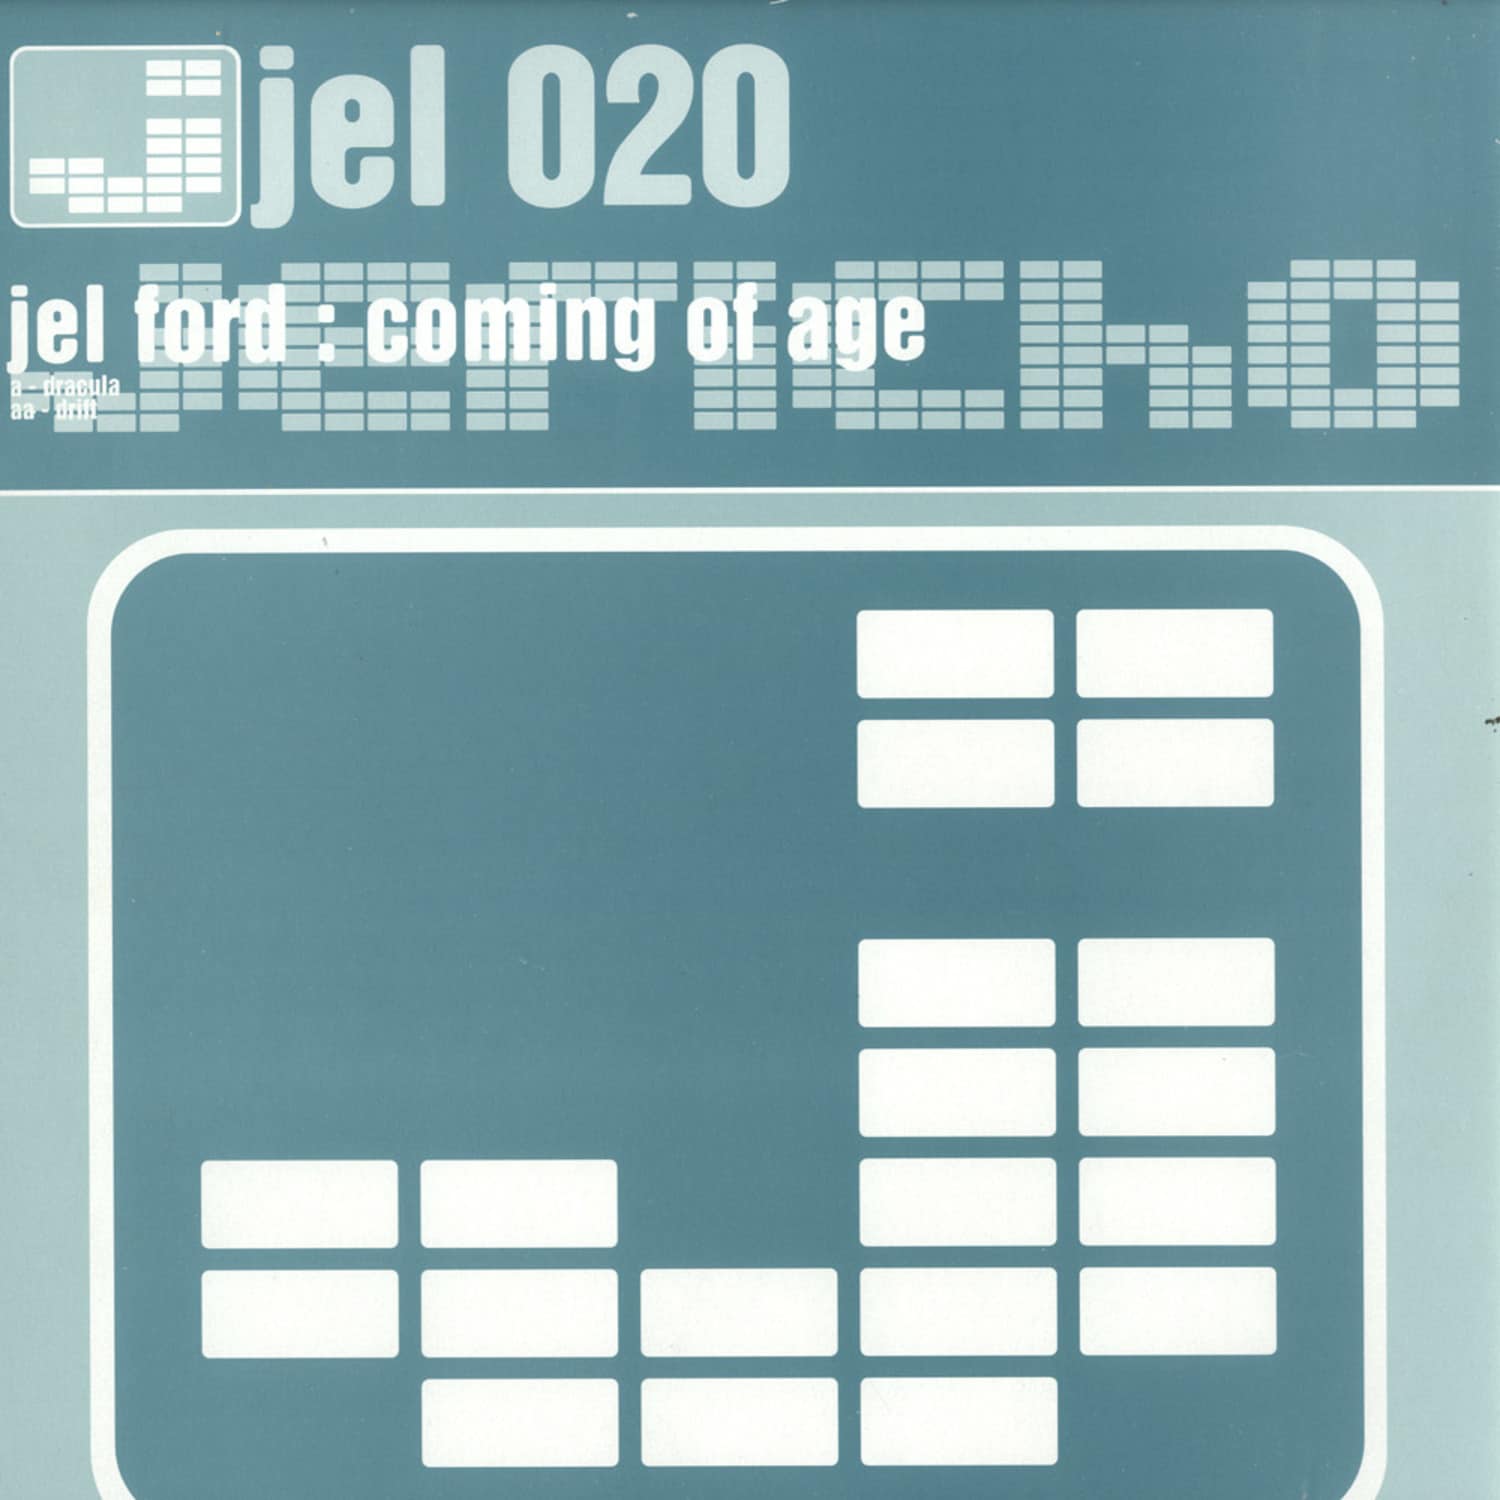 Jel Ford - COMING OD AGE